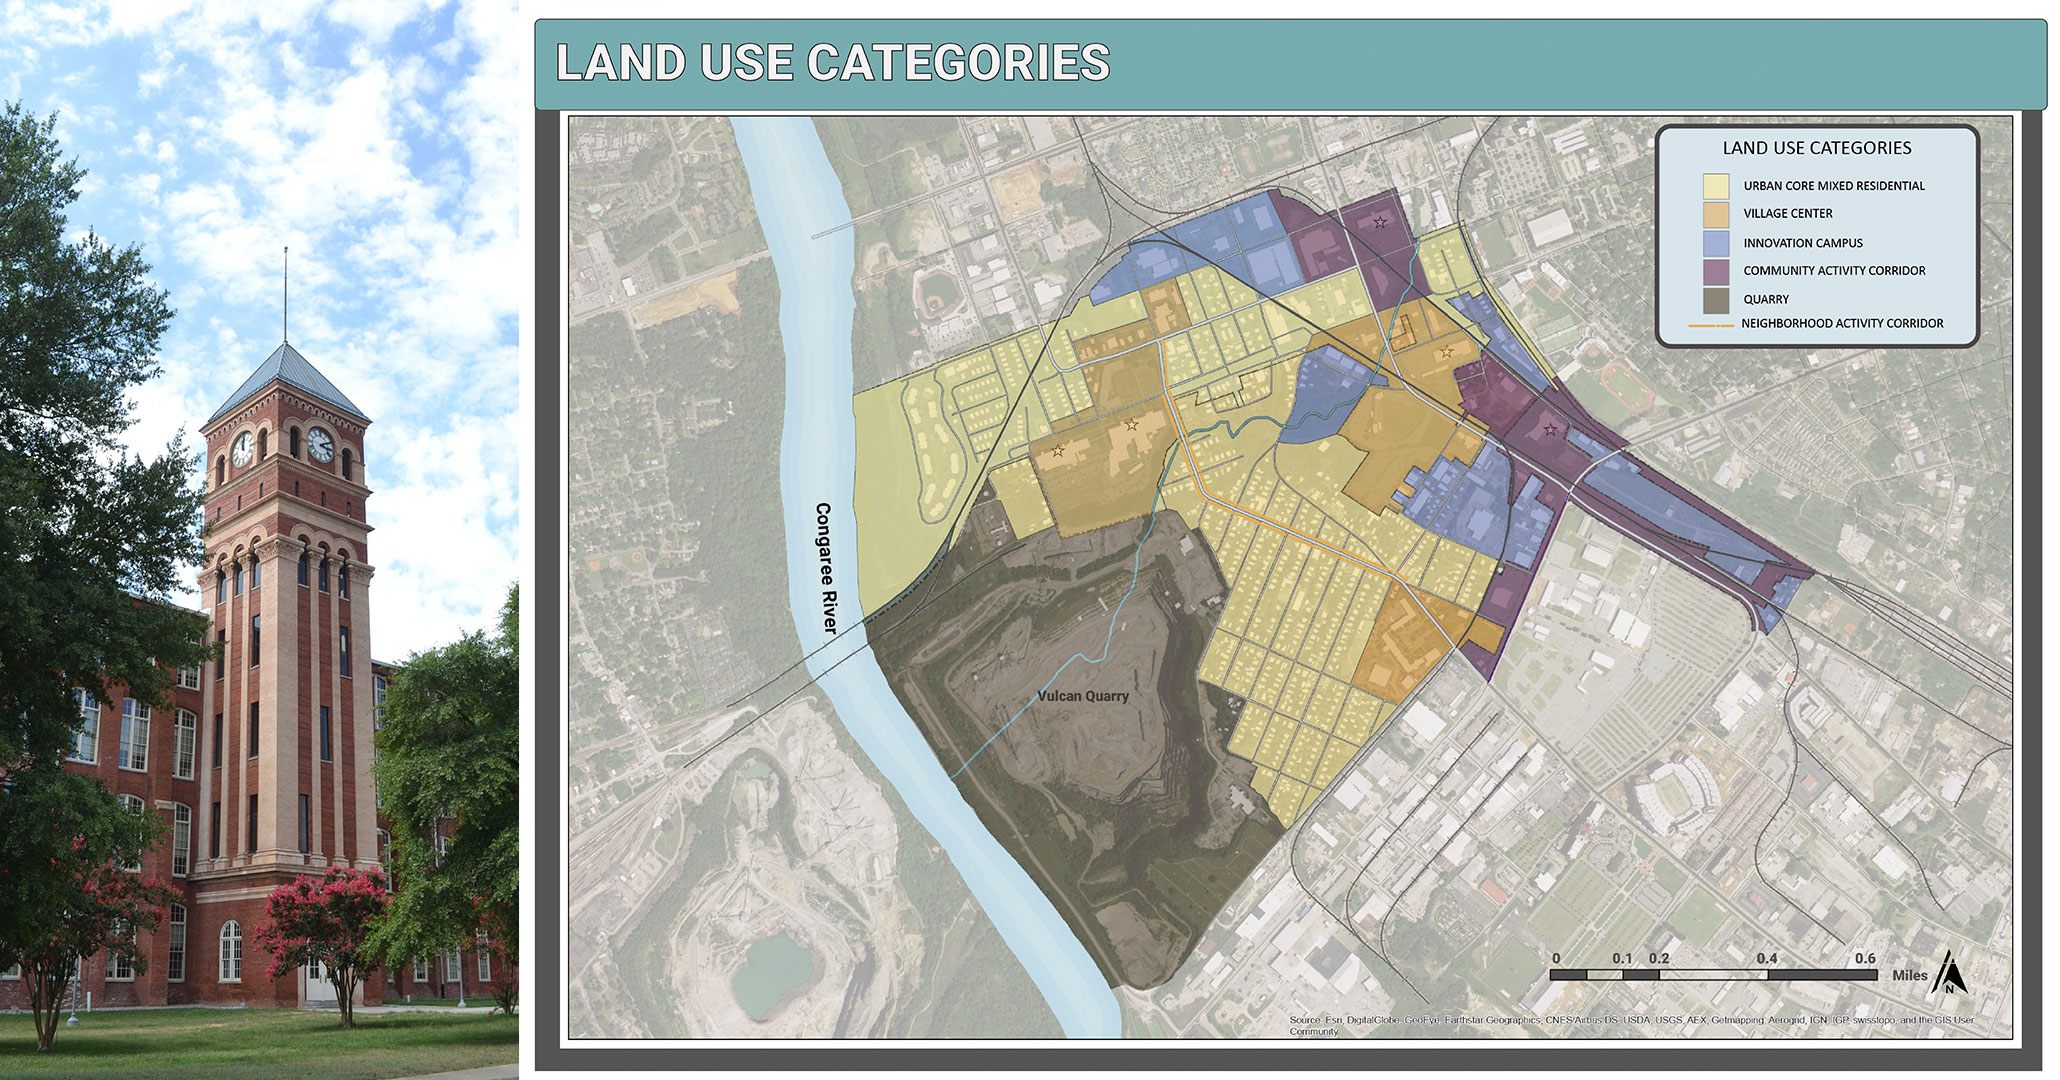 BOUDREAUX planners worked with City of Columbia SC to develop land use categories for the Capital City Mill District